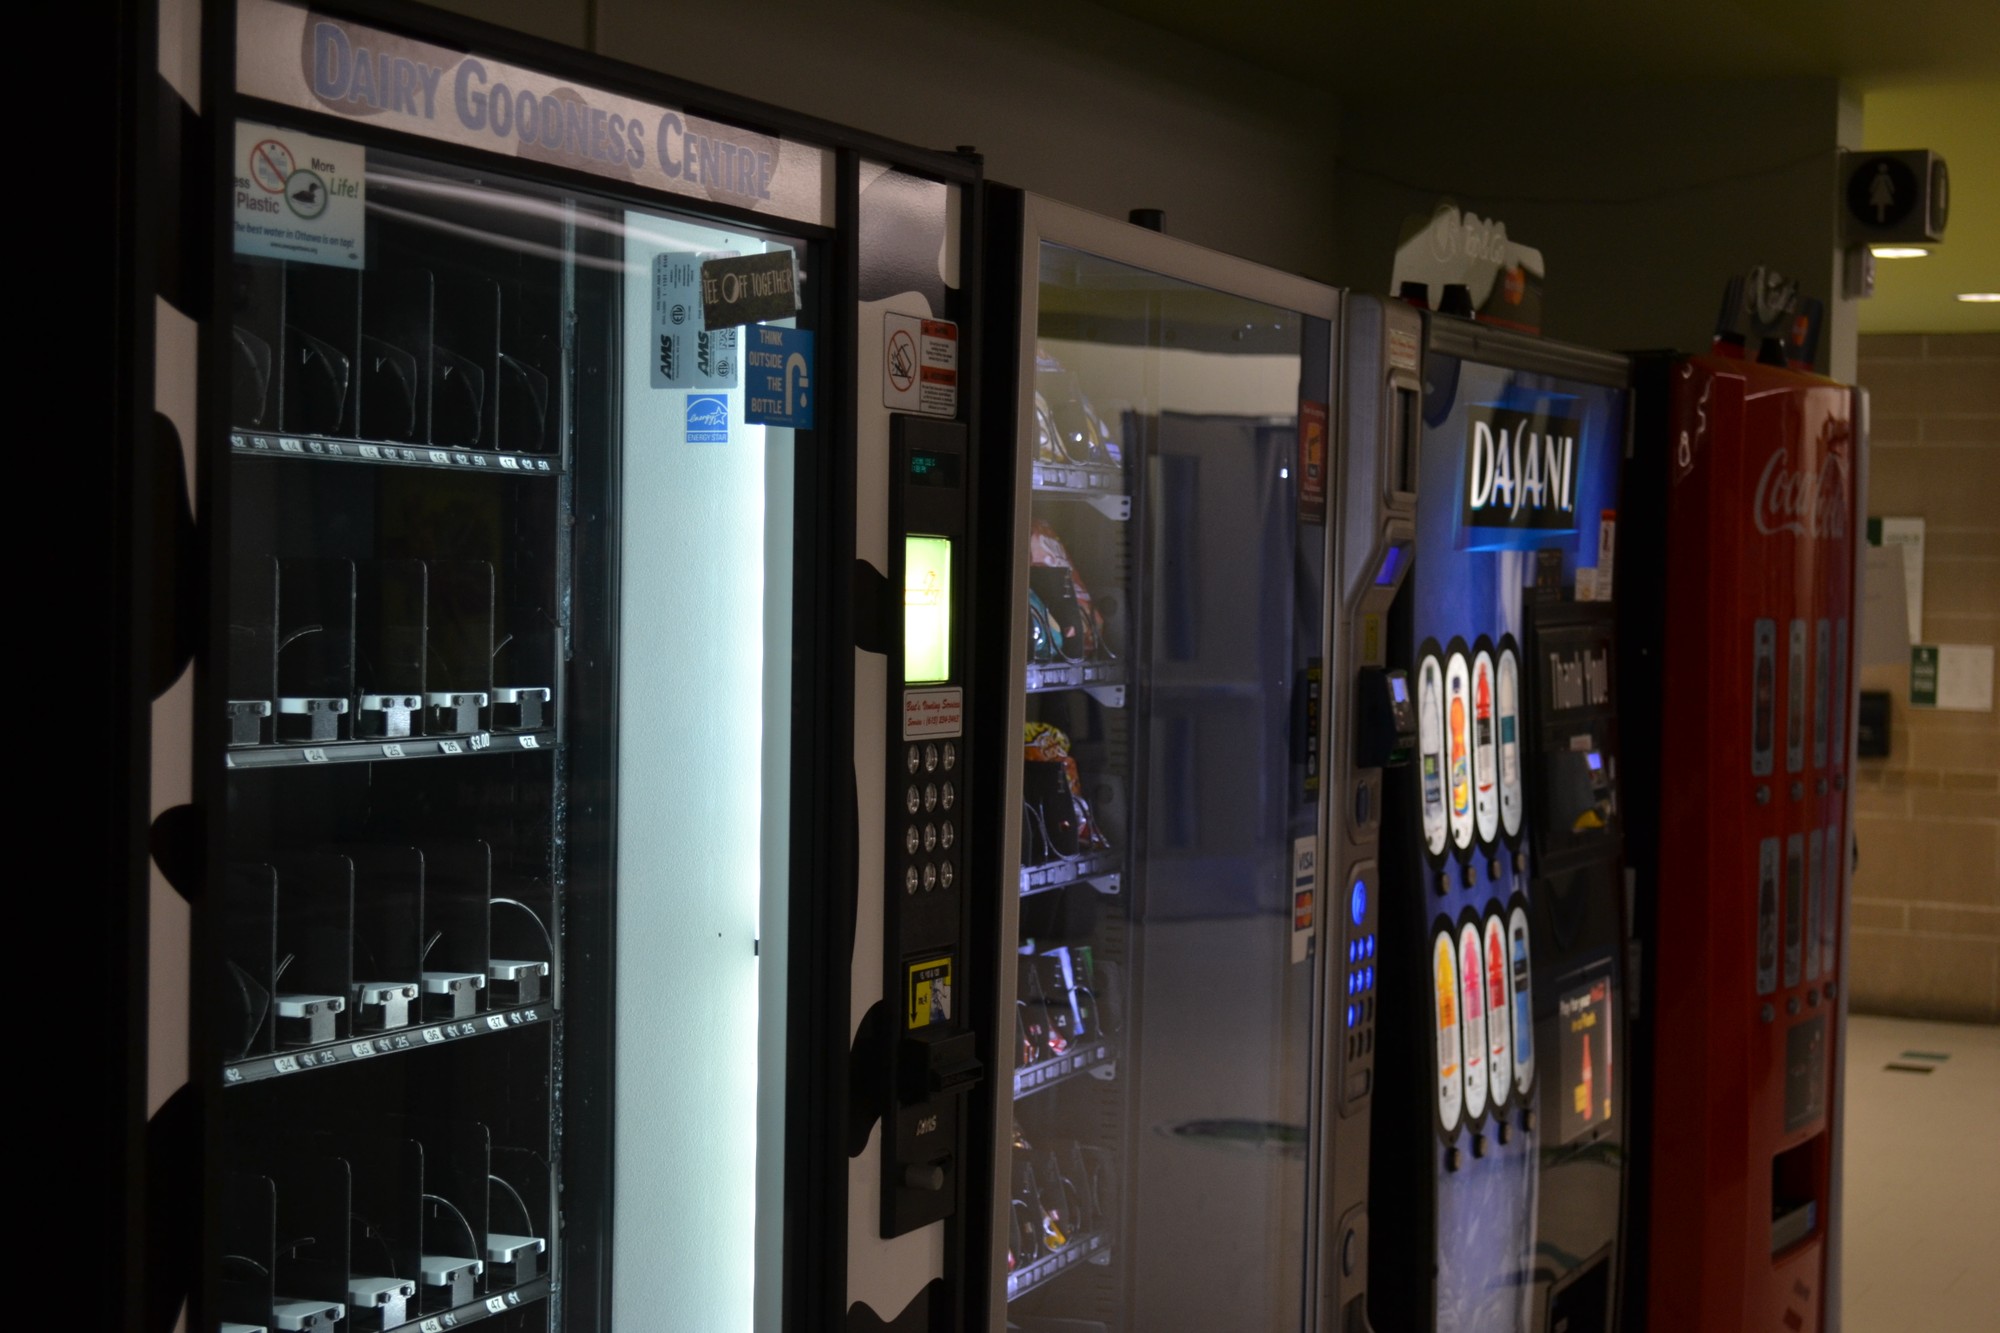 These are some of the vending machines located in the Robert C. Gillett Student Commons building on campus. Four of many spread within campus buildings.